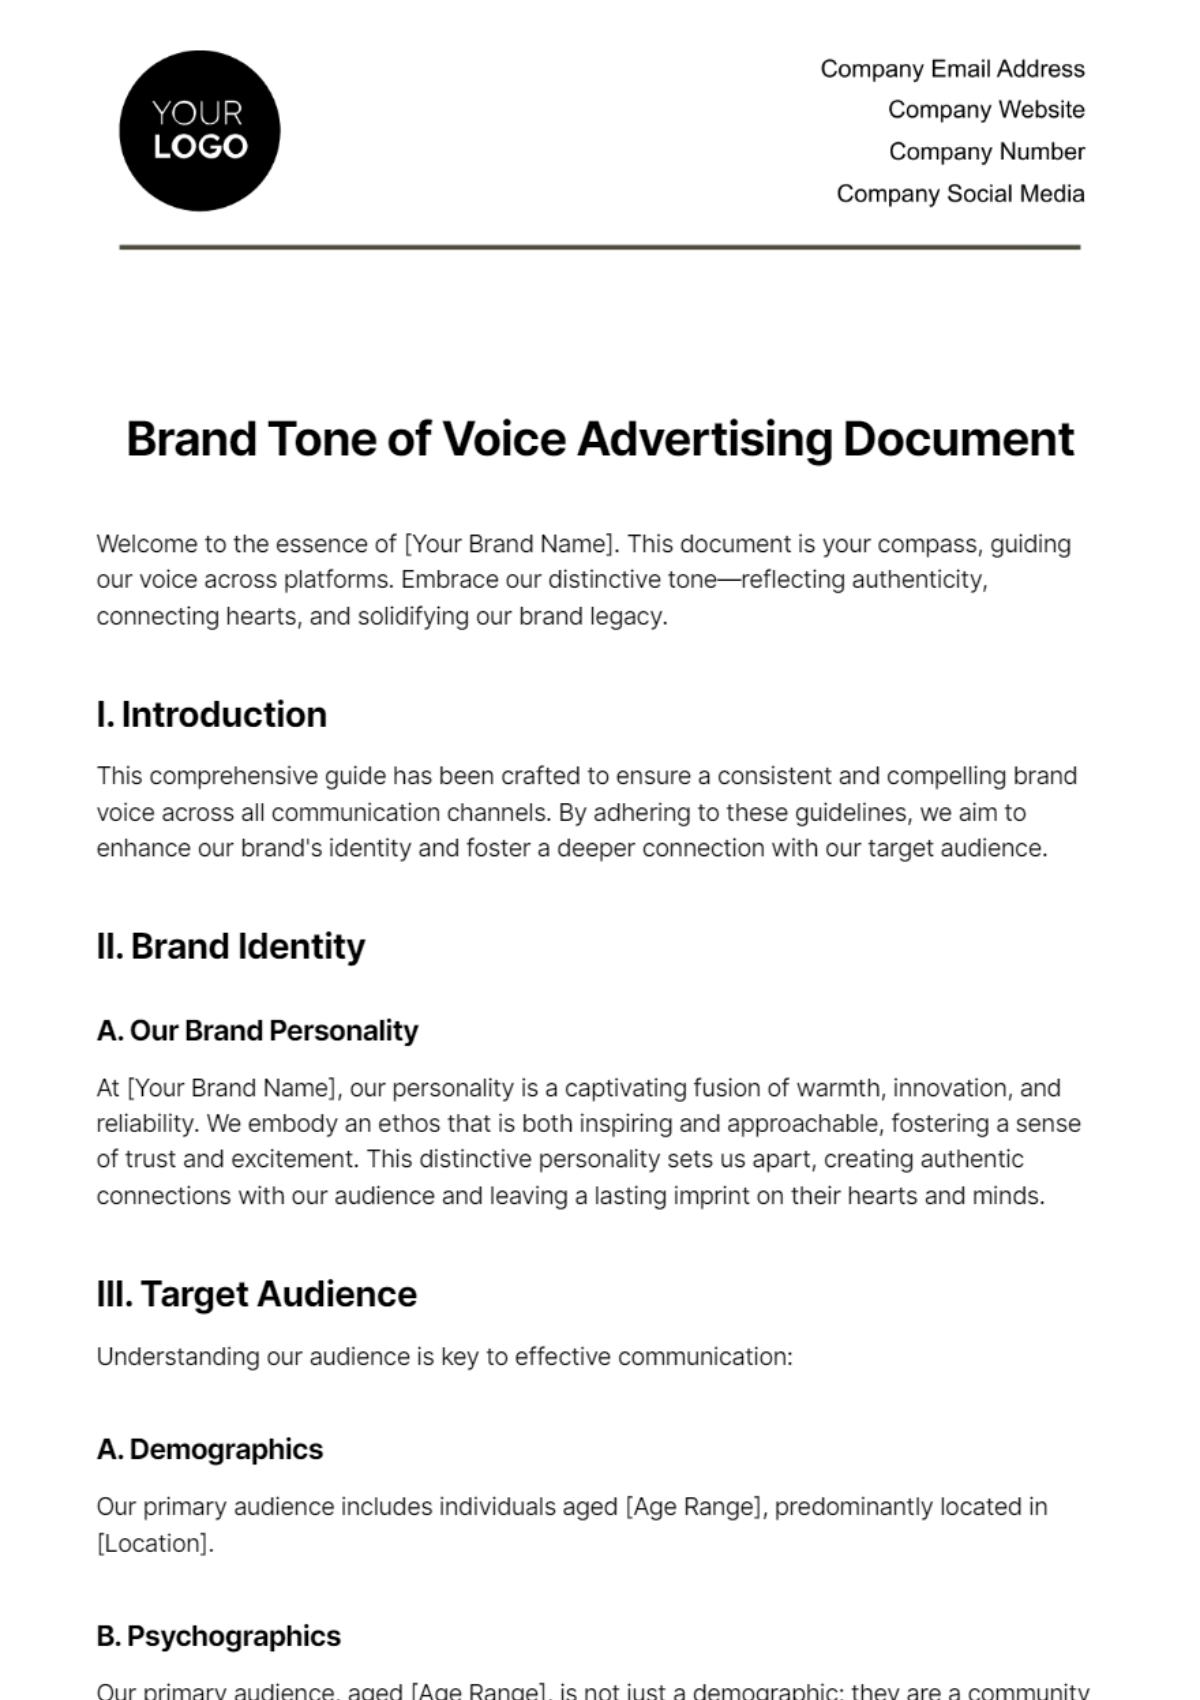 Free Brand Tone of Voice Advertising Document Template